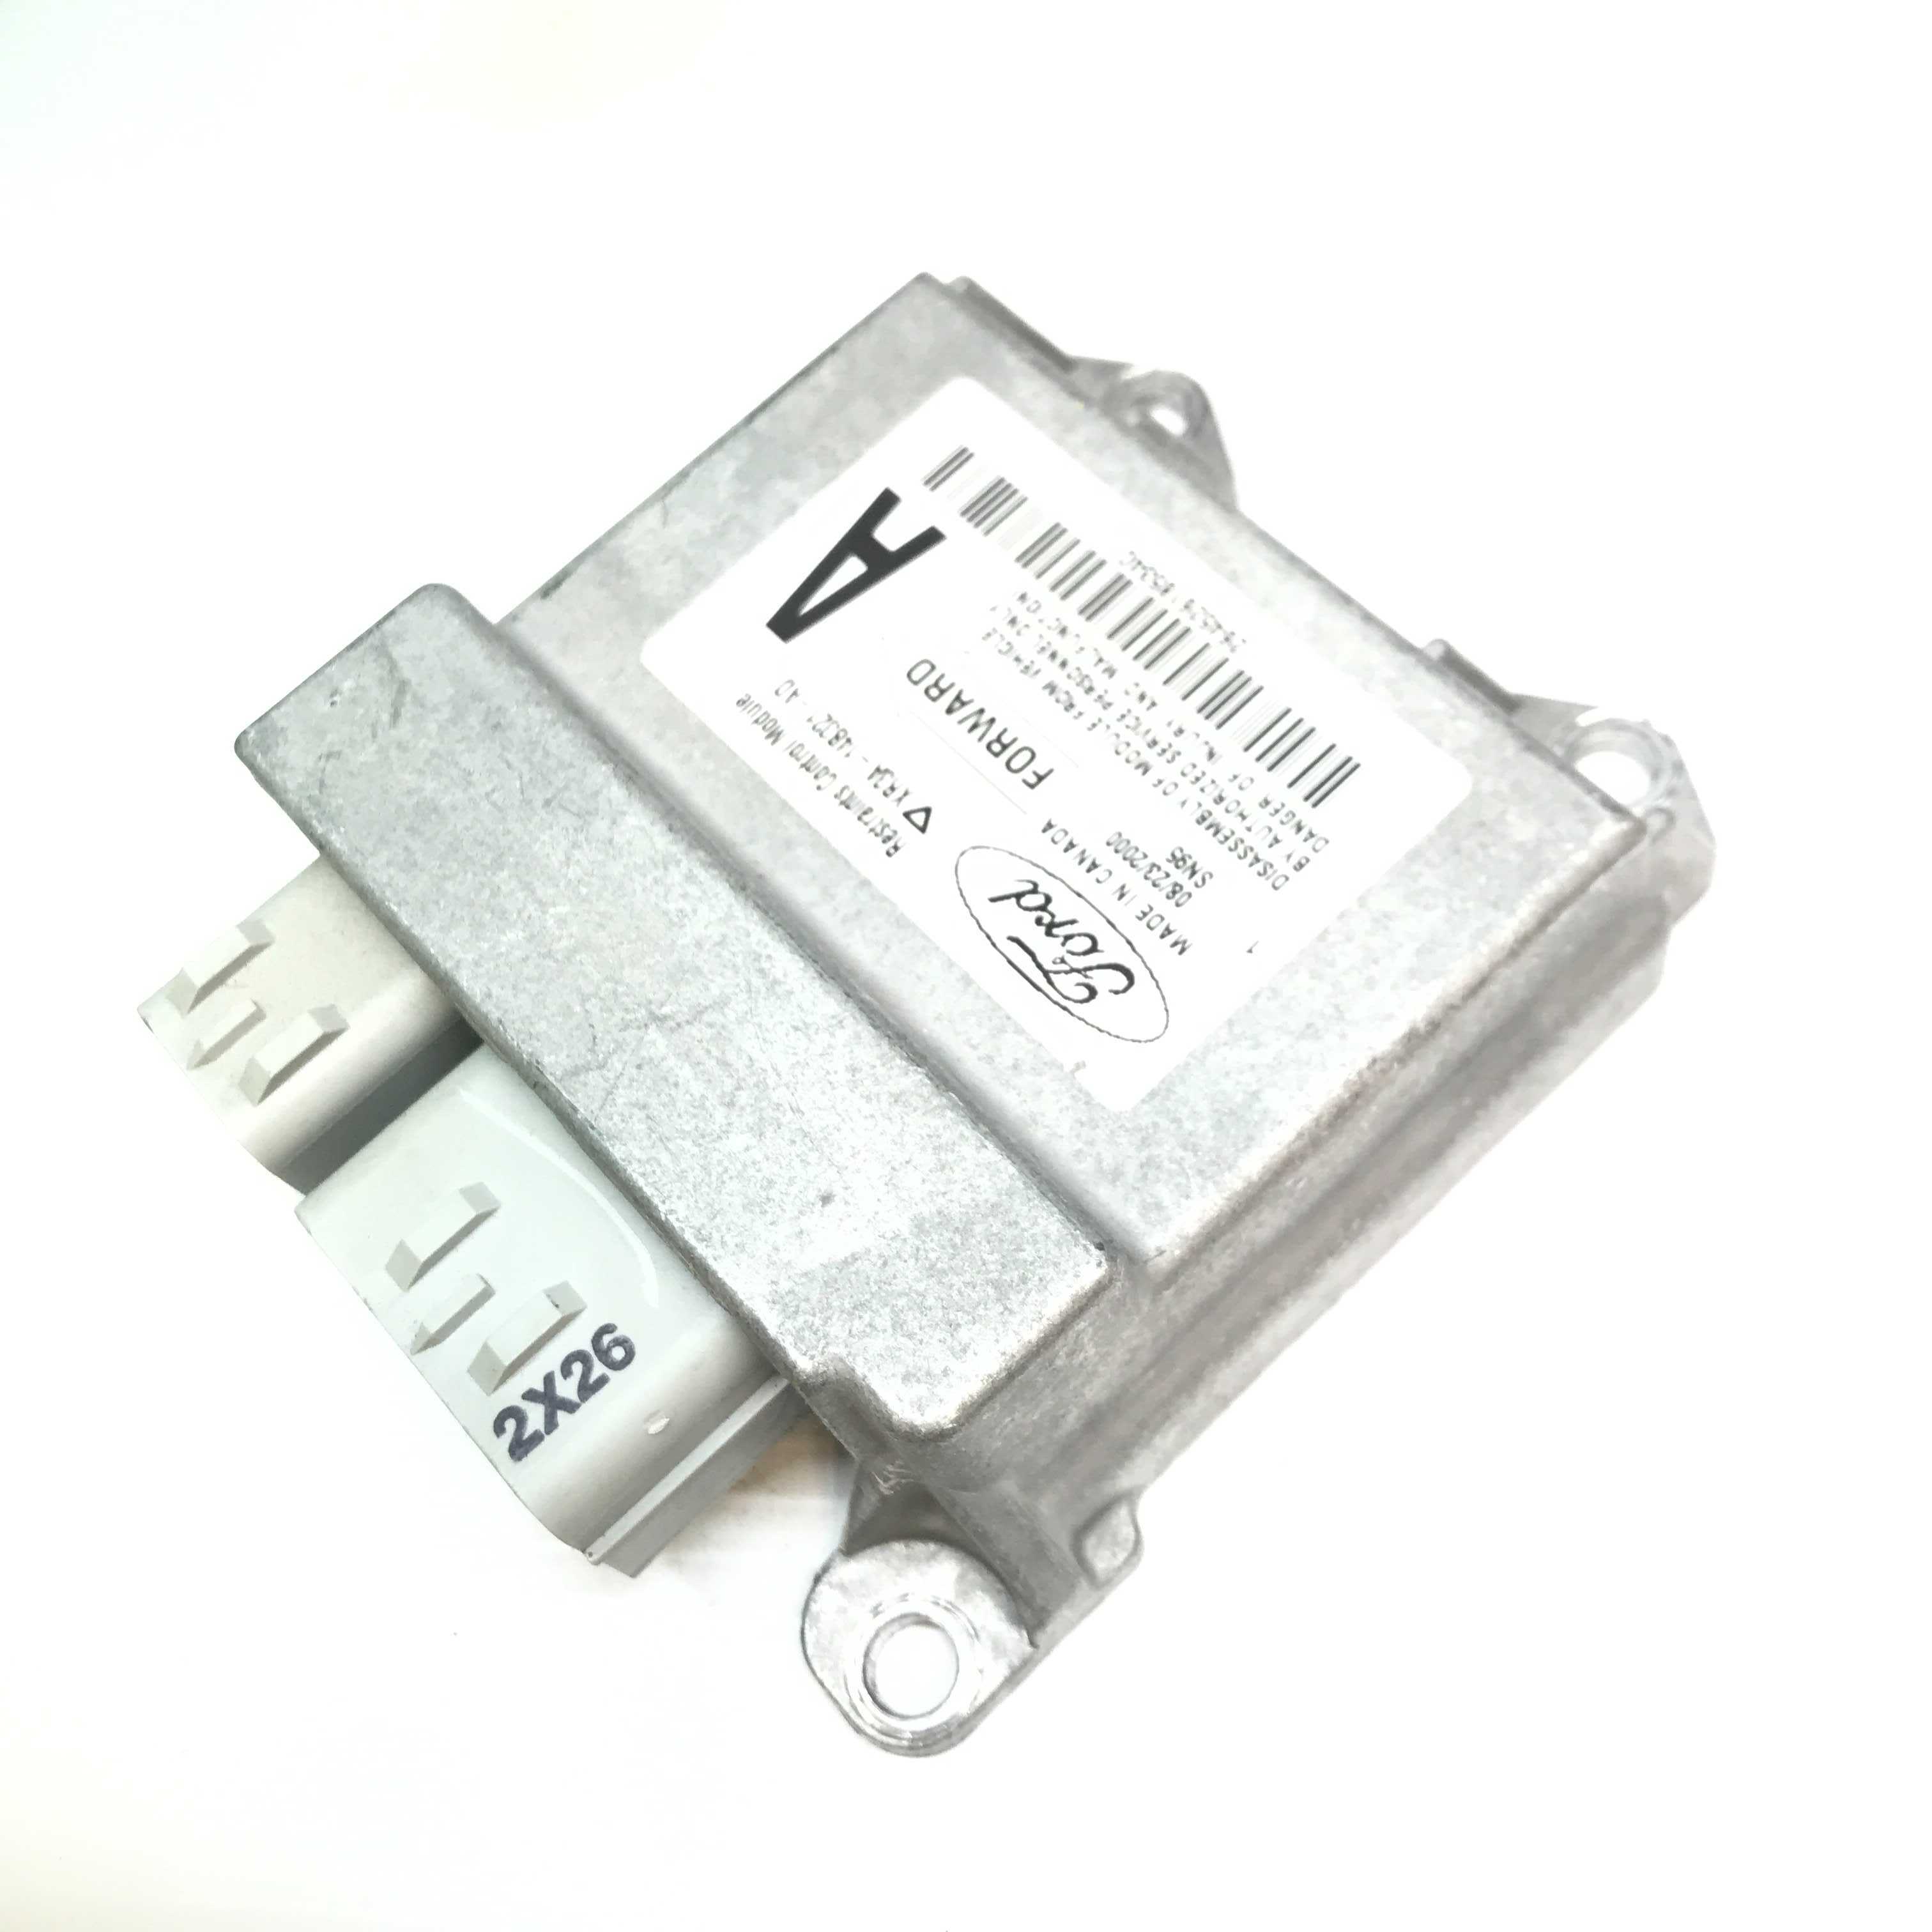 FORD MUSTANG SRS (RCM) Restraint Control Module - Airbag Computer Control Module PART #XR3A14B321AD